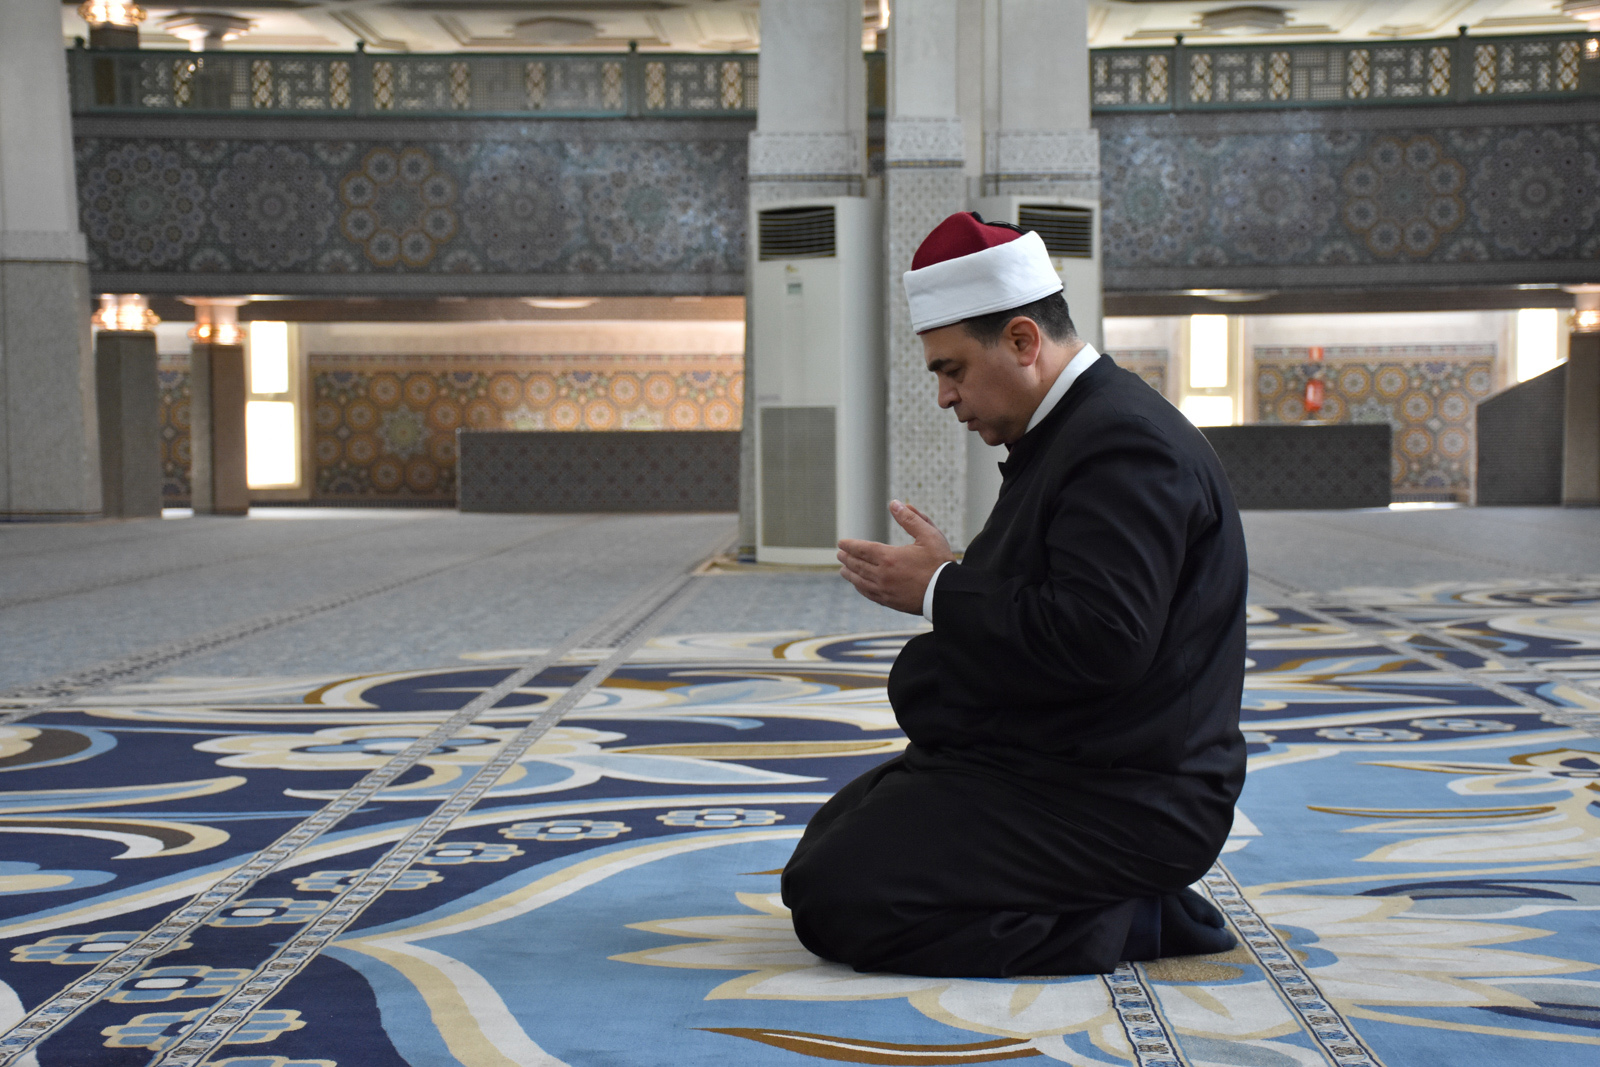 A worshipper prays in solitude inside the Grand Mosque.